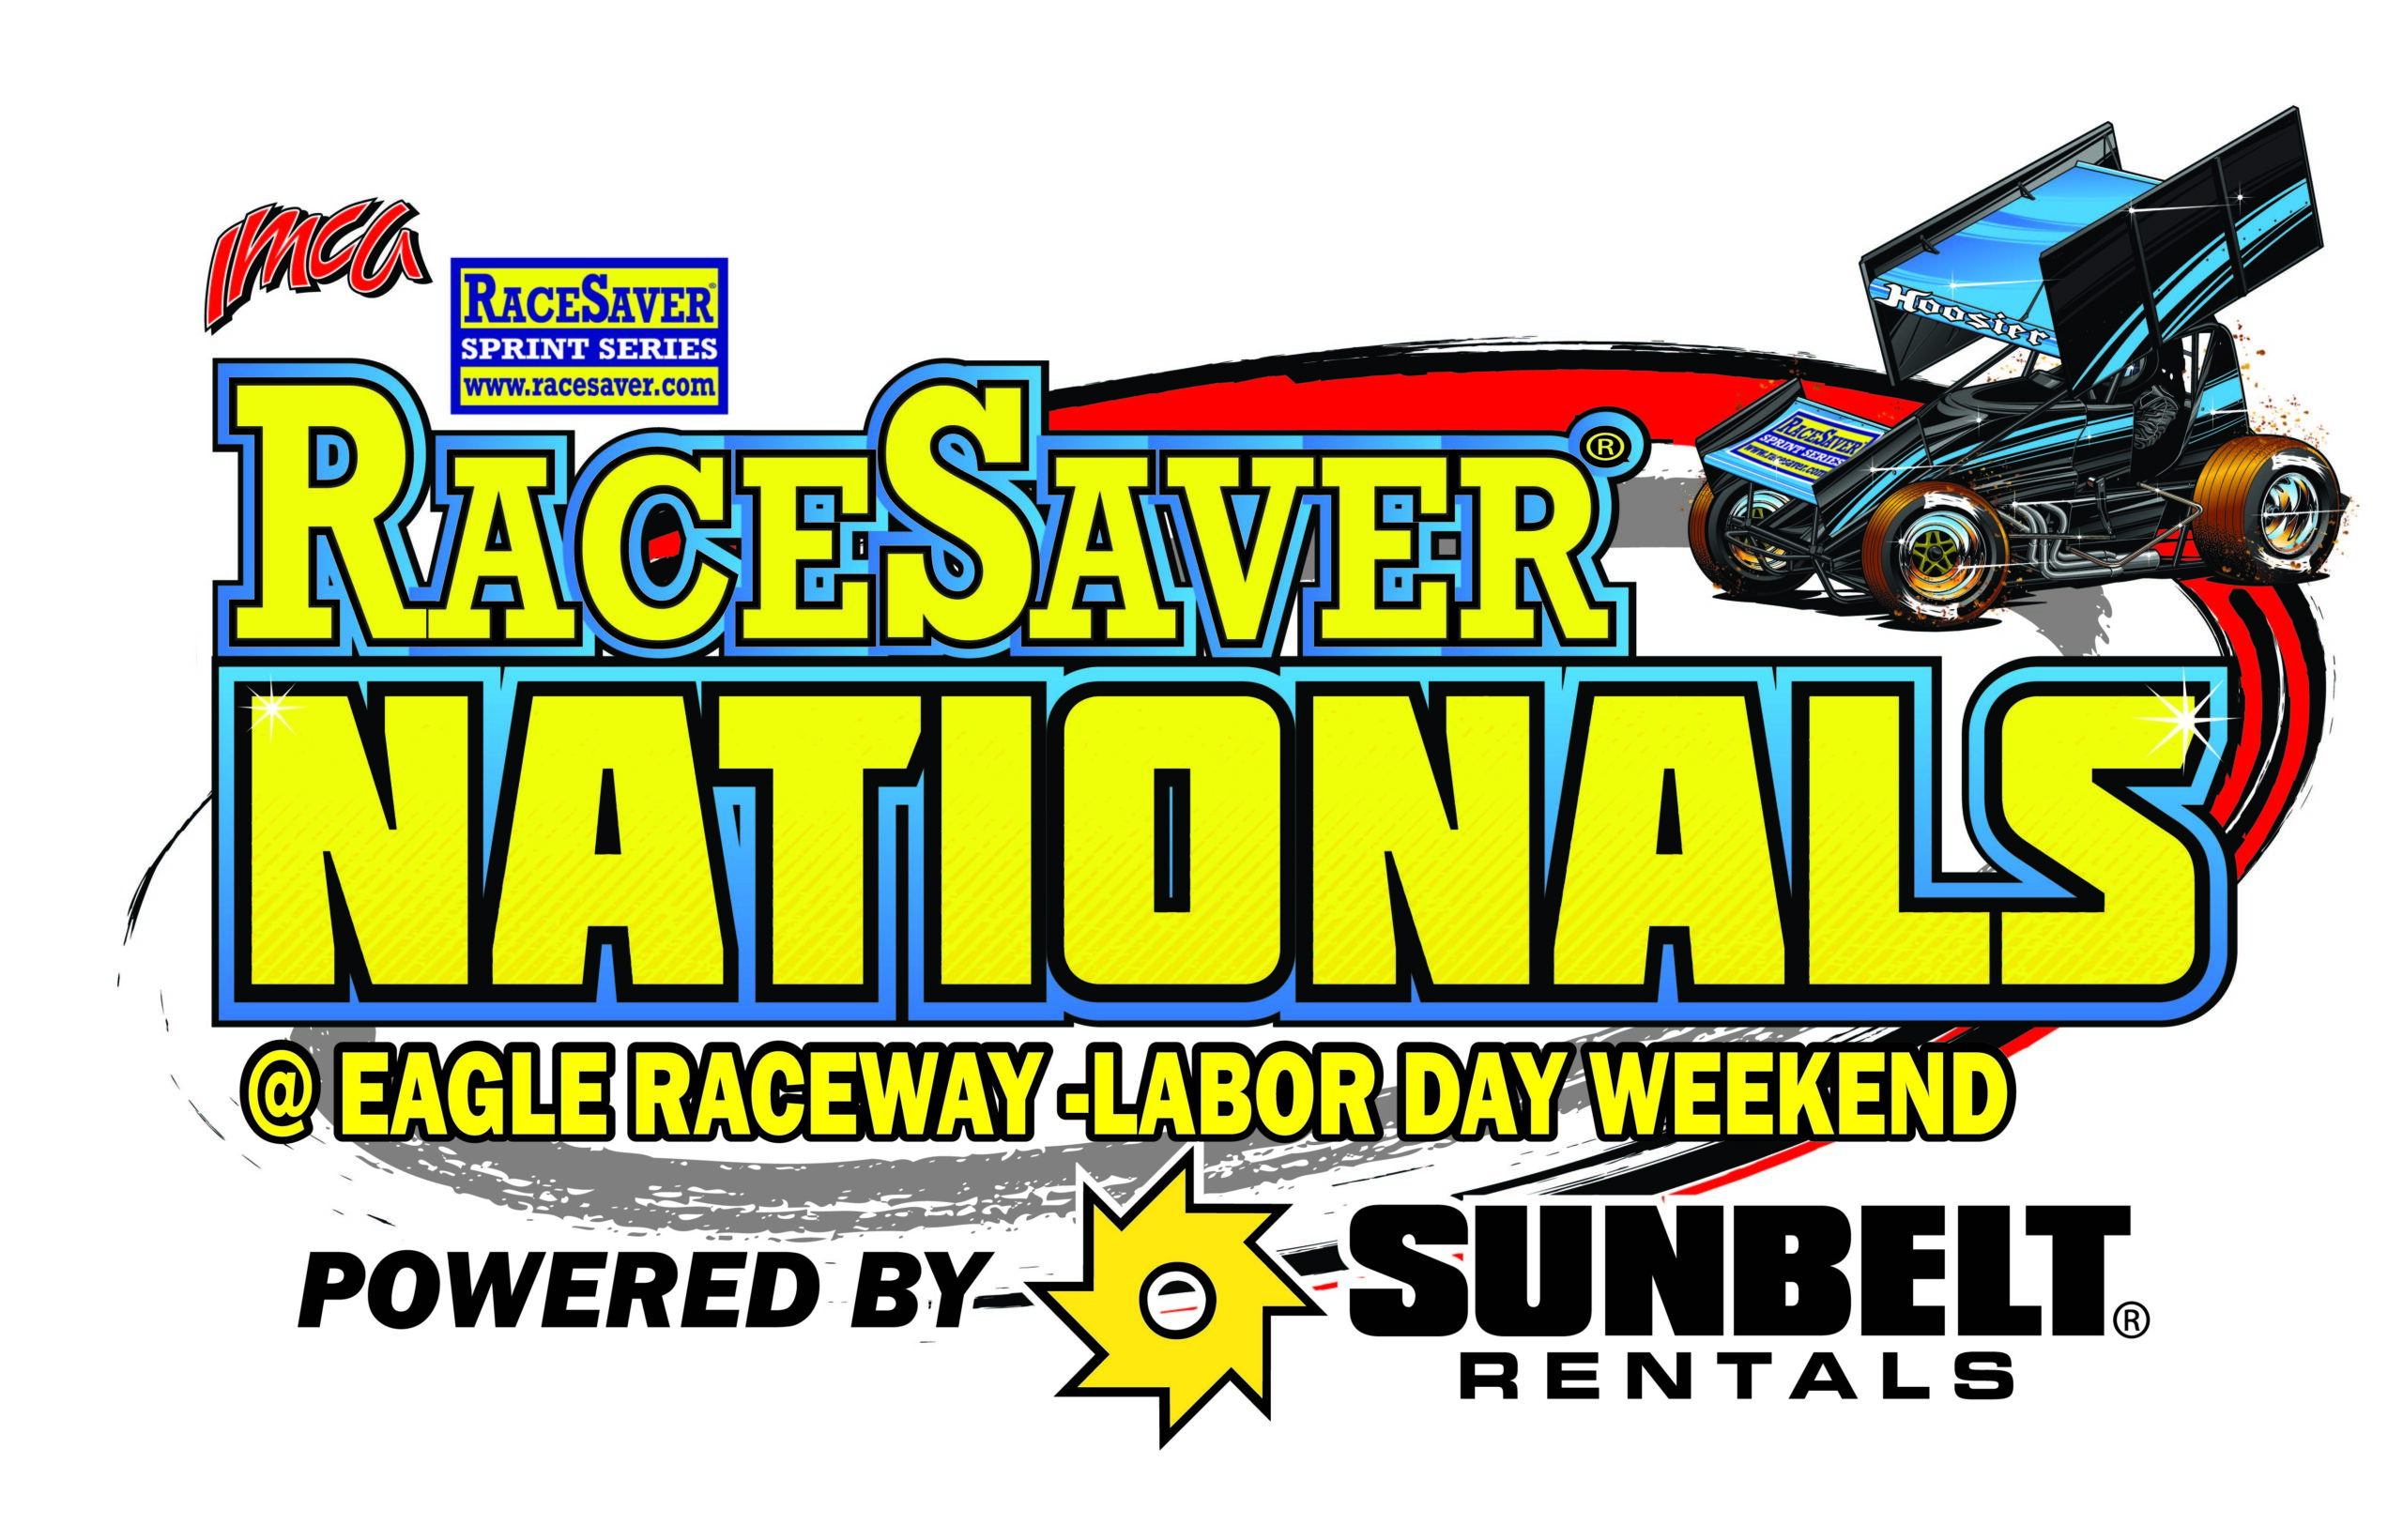 Nationals Drivers: You must pre-register for RaceSaver Nationals by August 1st to guarantee the same pit stall for this year